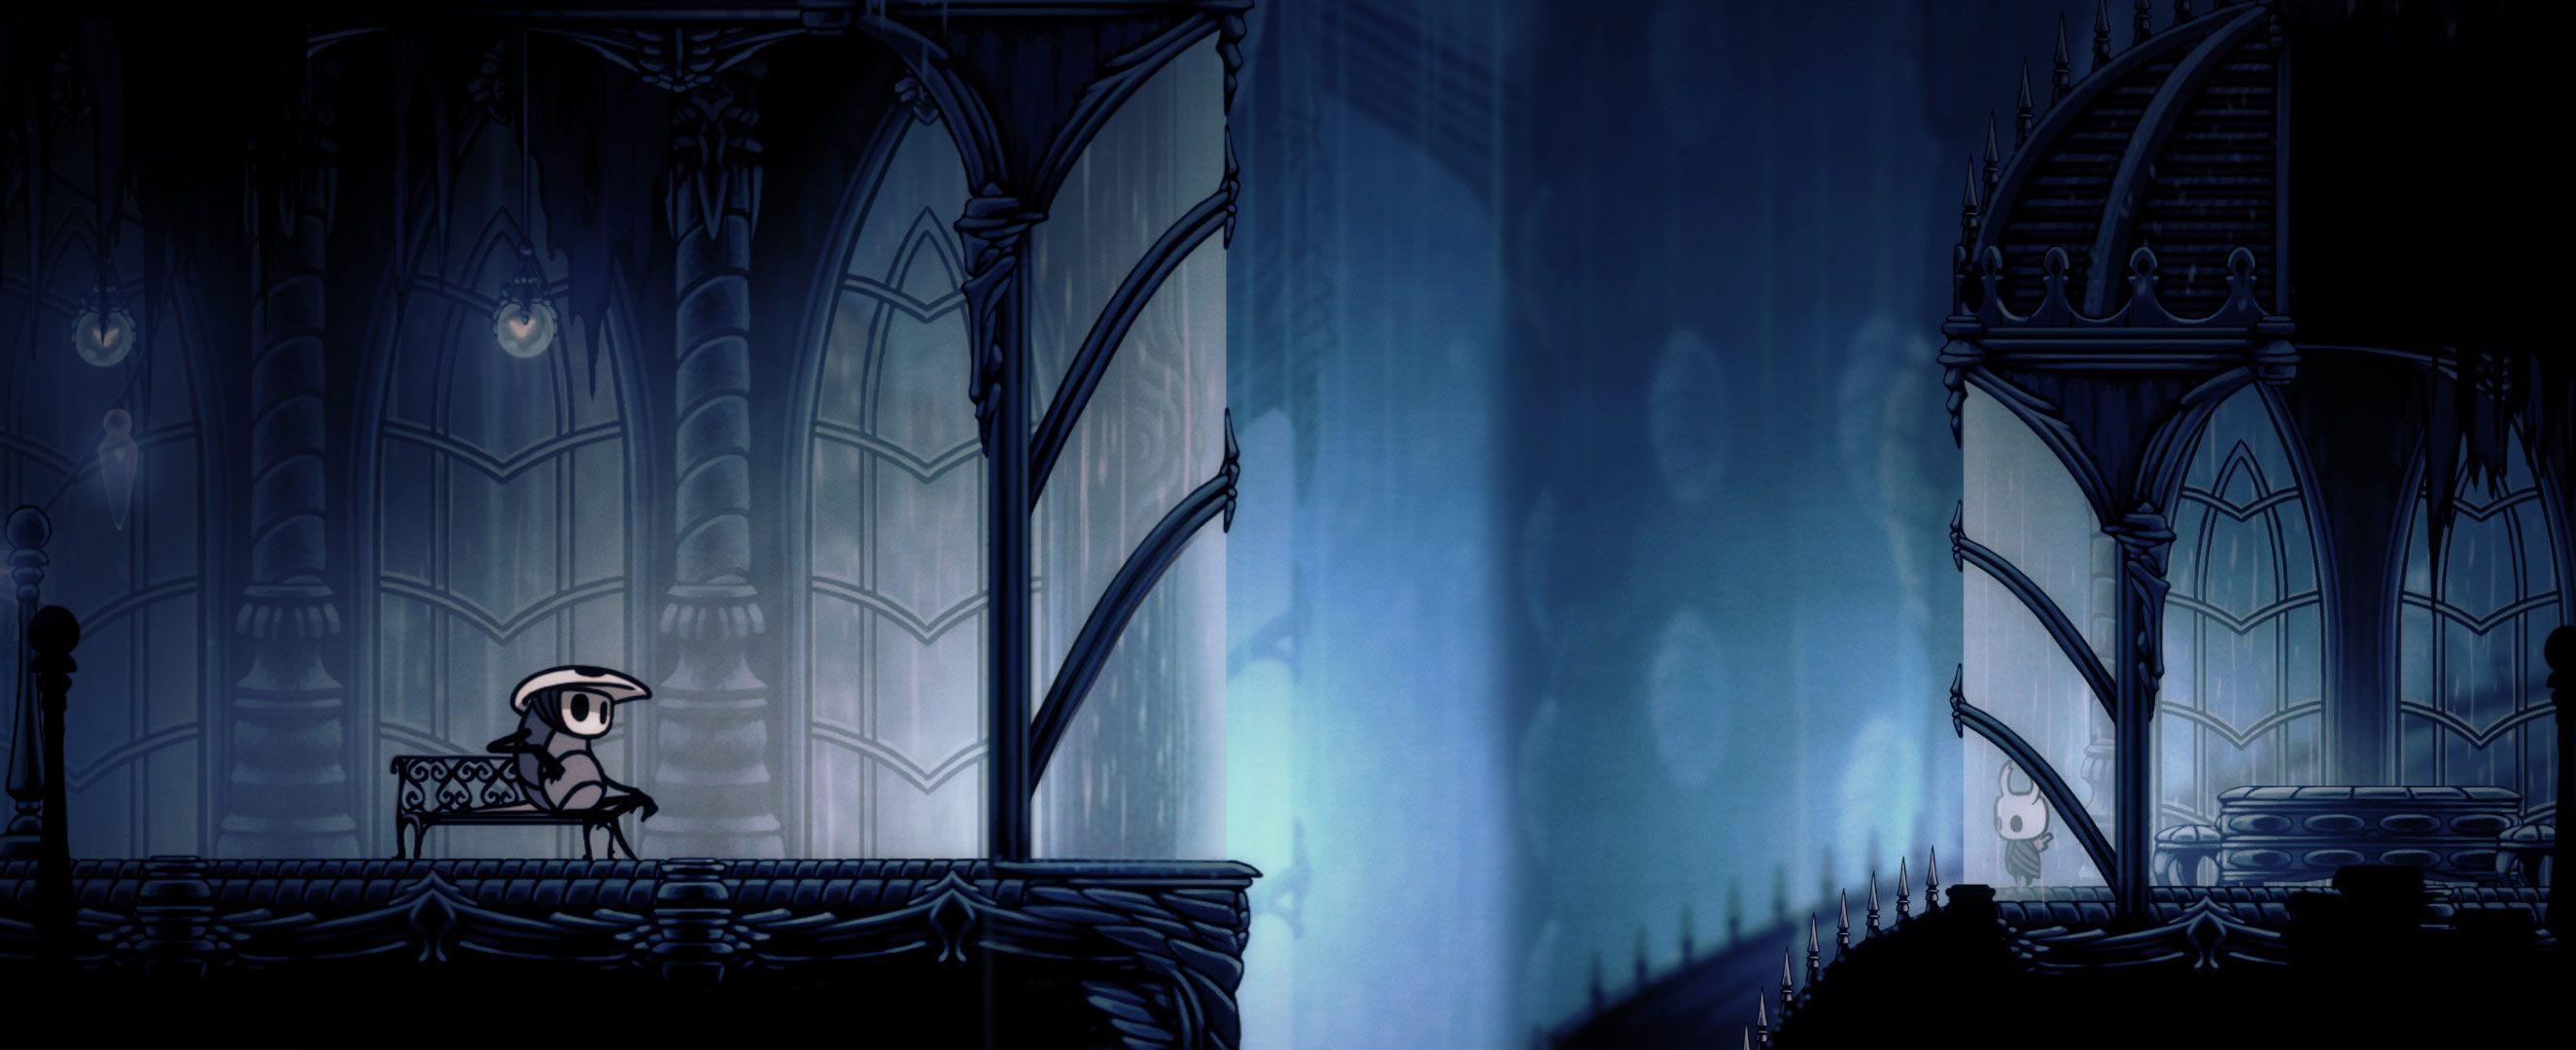 Hollow Knight Wiki Community Updates, News, and More!